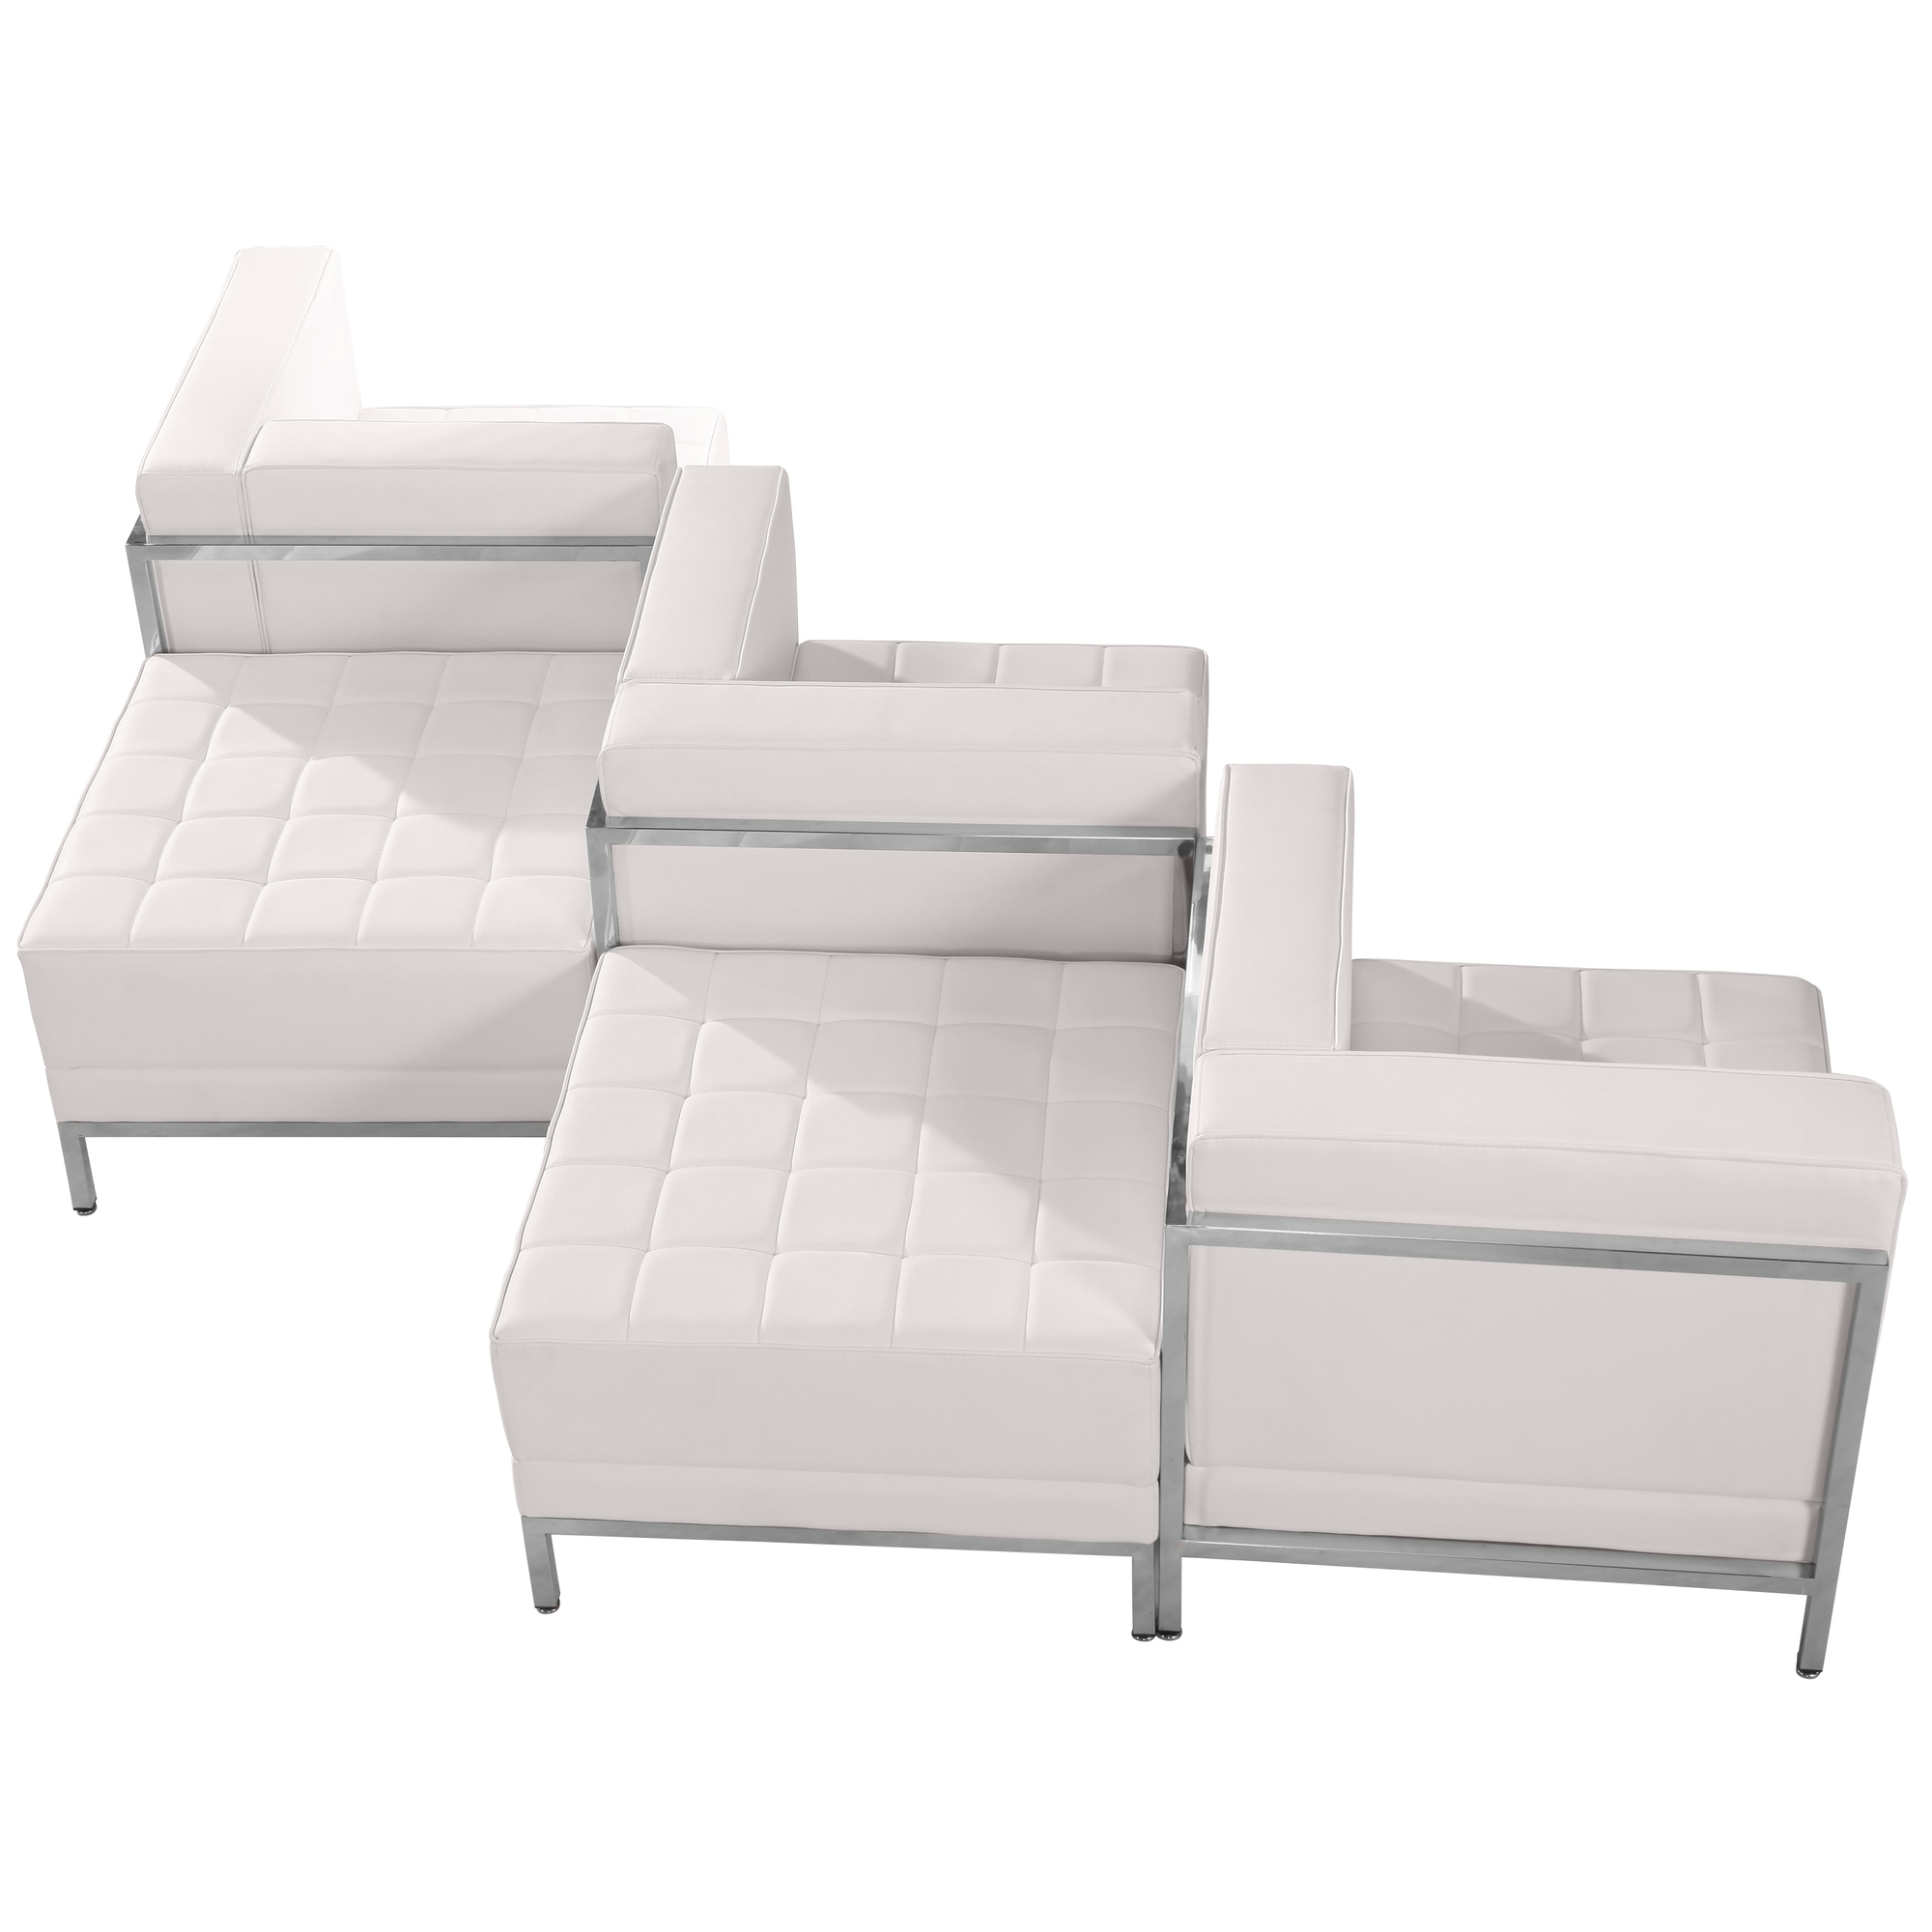 Flash Furniture, White LeatherSoft 5 Piece Chair Ottoman Set, Primary Color White, Included (qty.) 5, Model ZBIMAGSET5WH